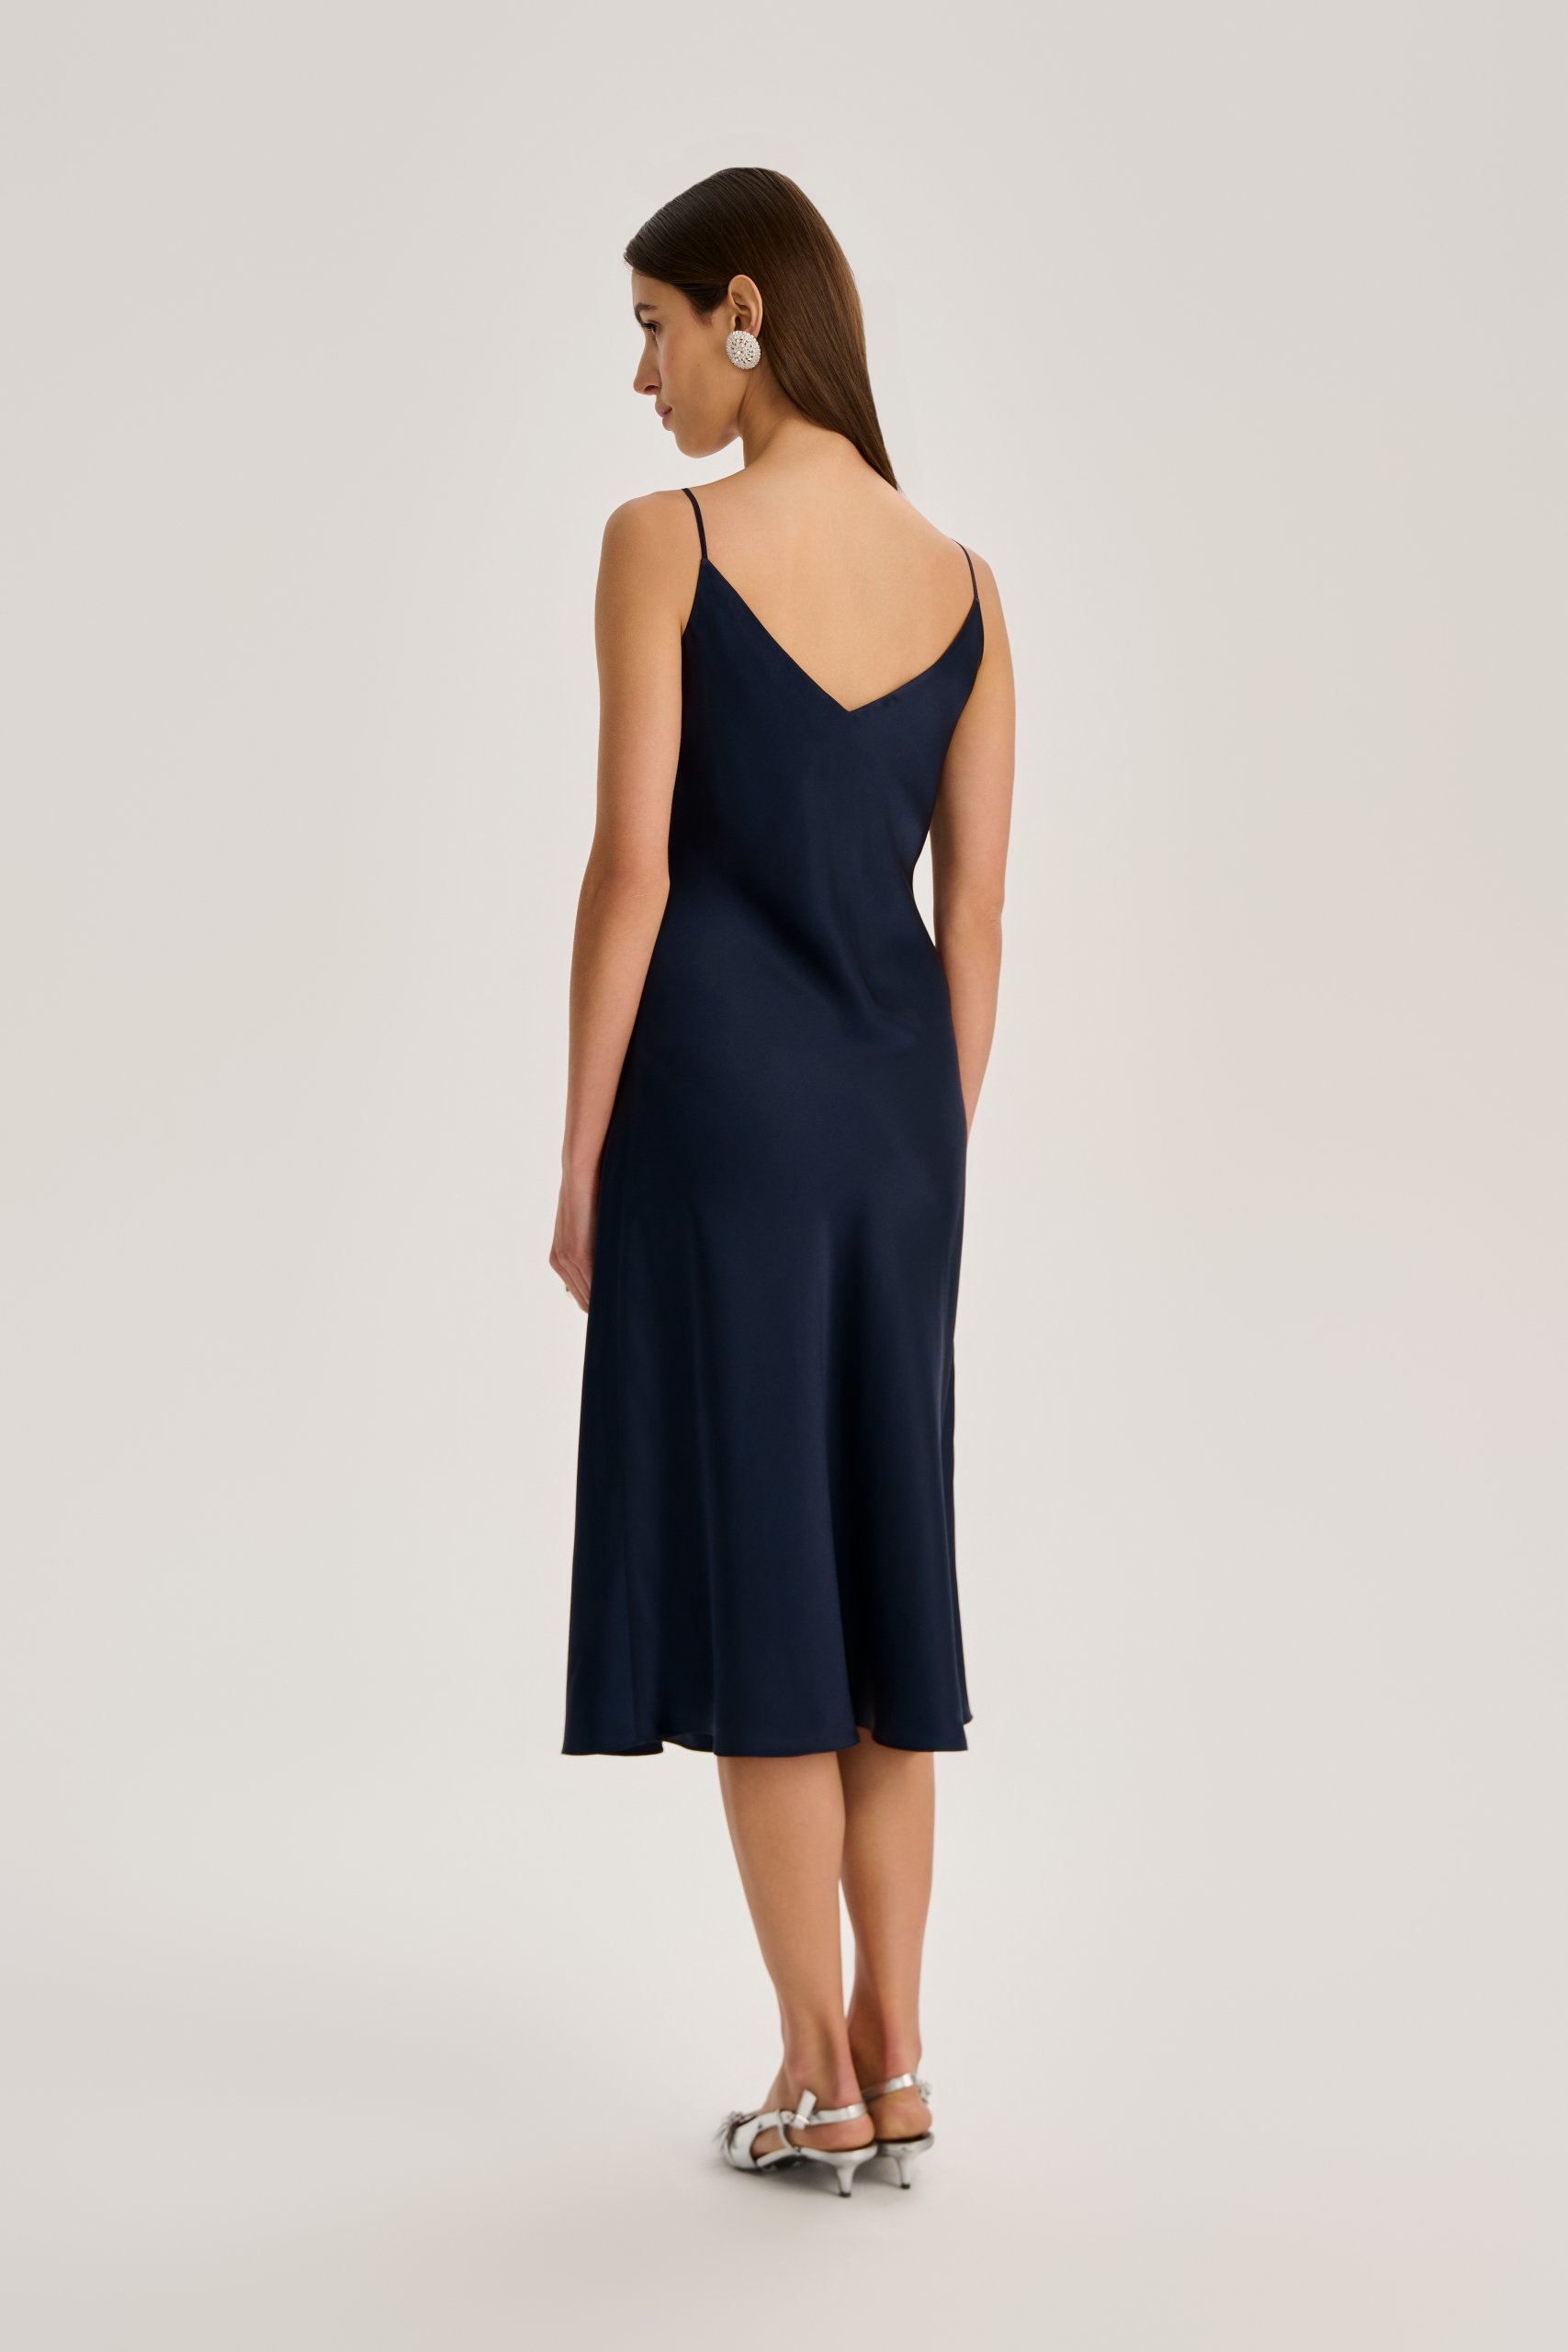 SILK MIDI DRESS FROM THE MOON COLLECTION